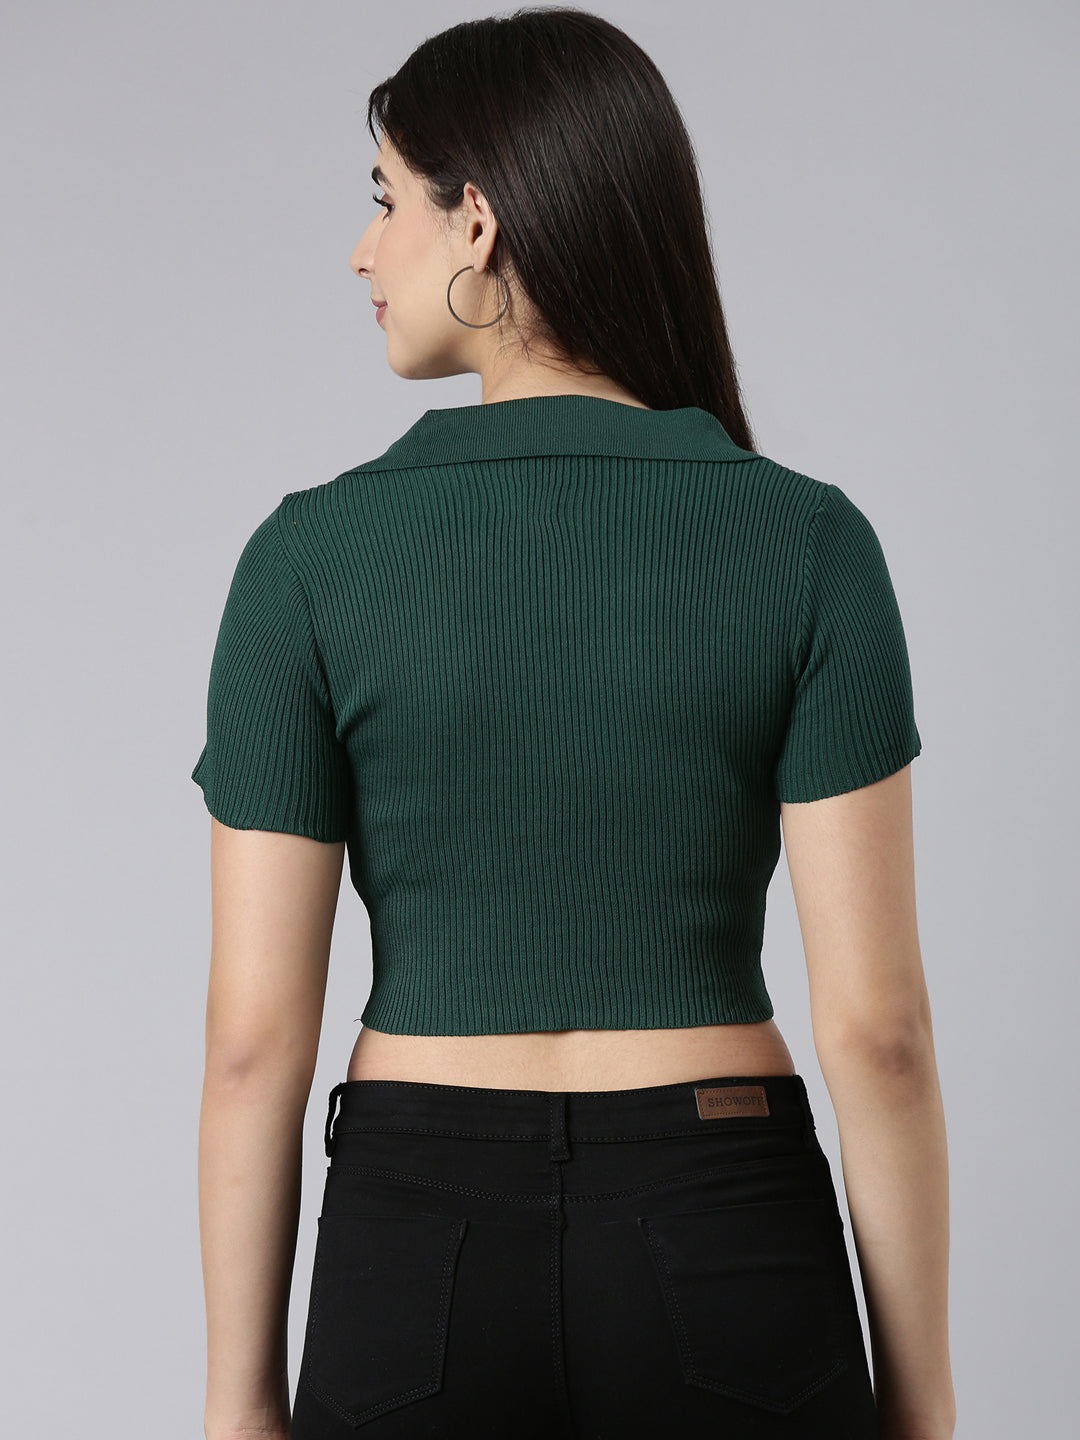 Above the Keyboard Collar Solid Green Crop Top